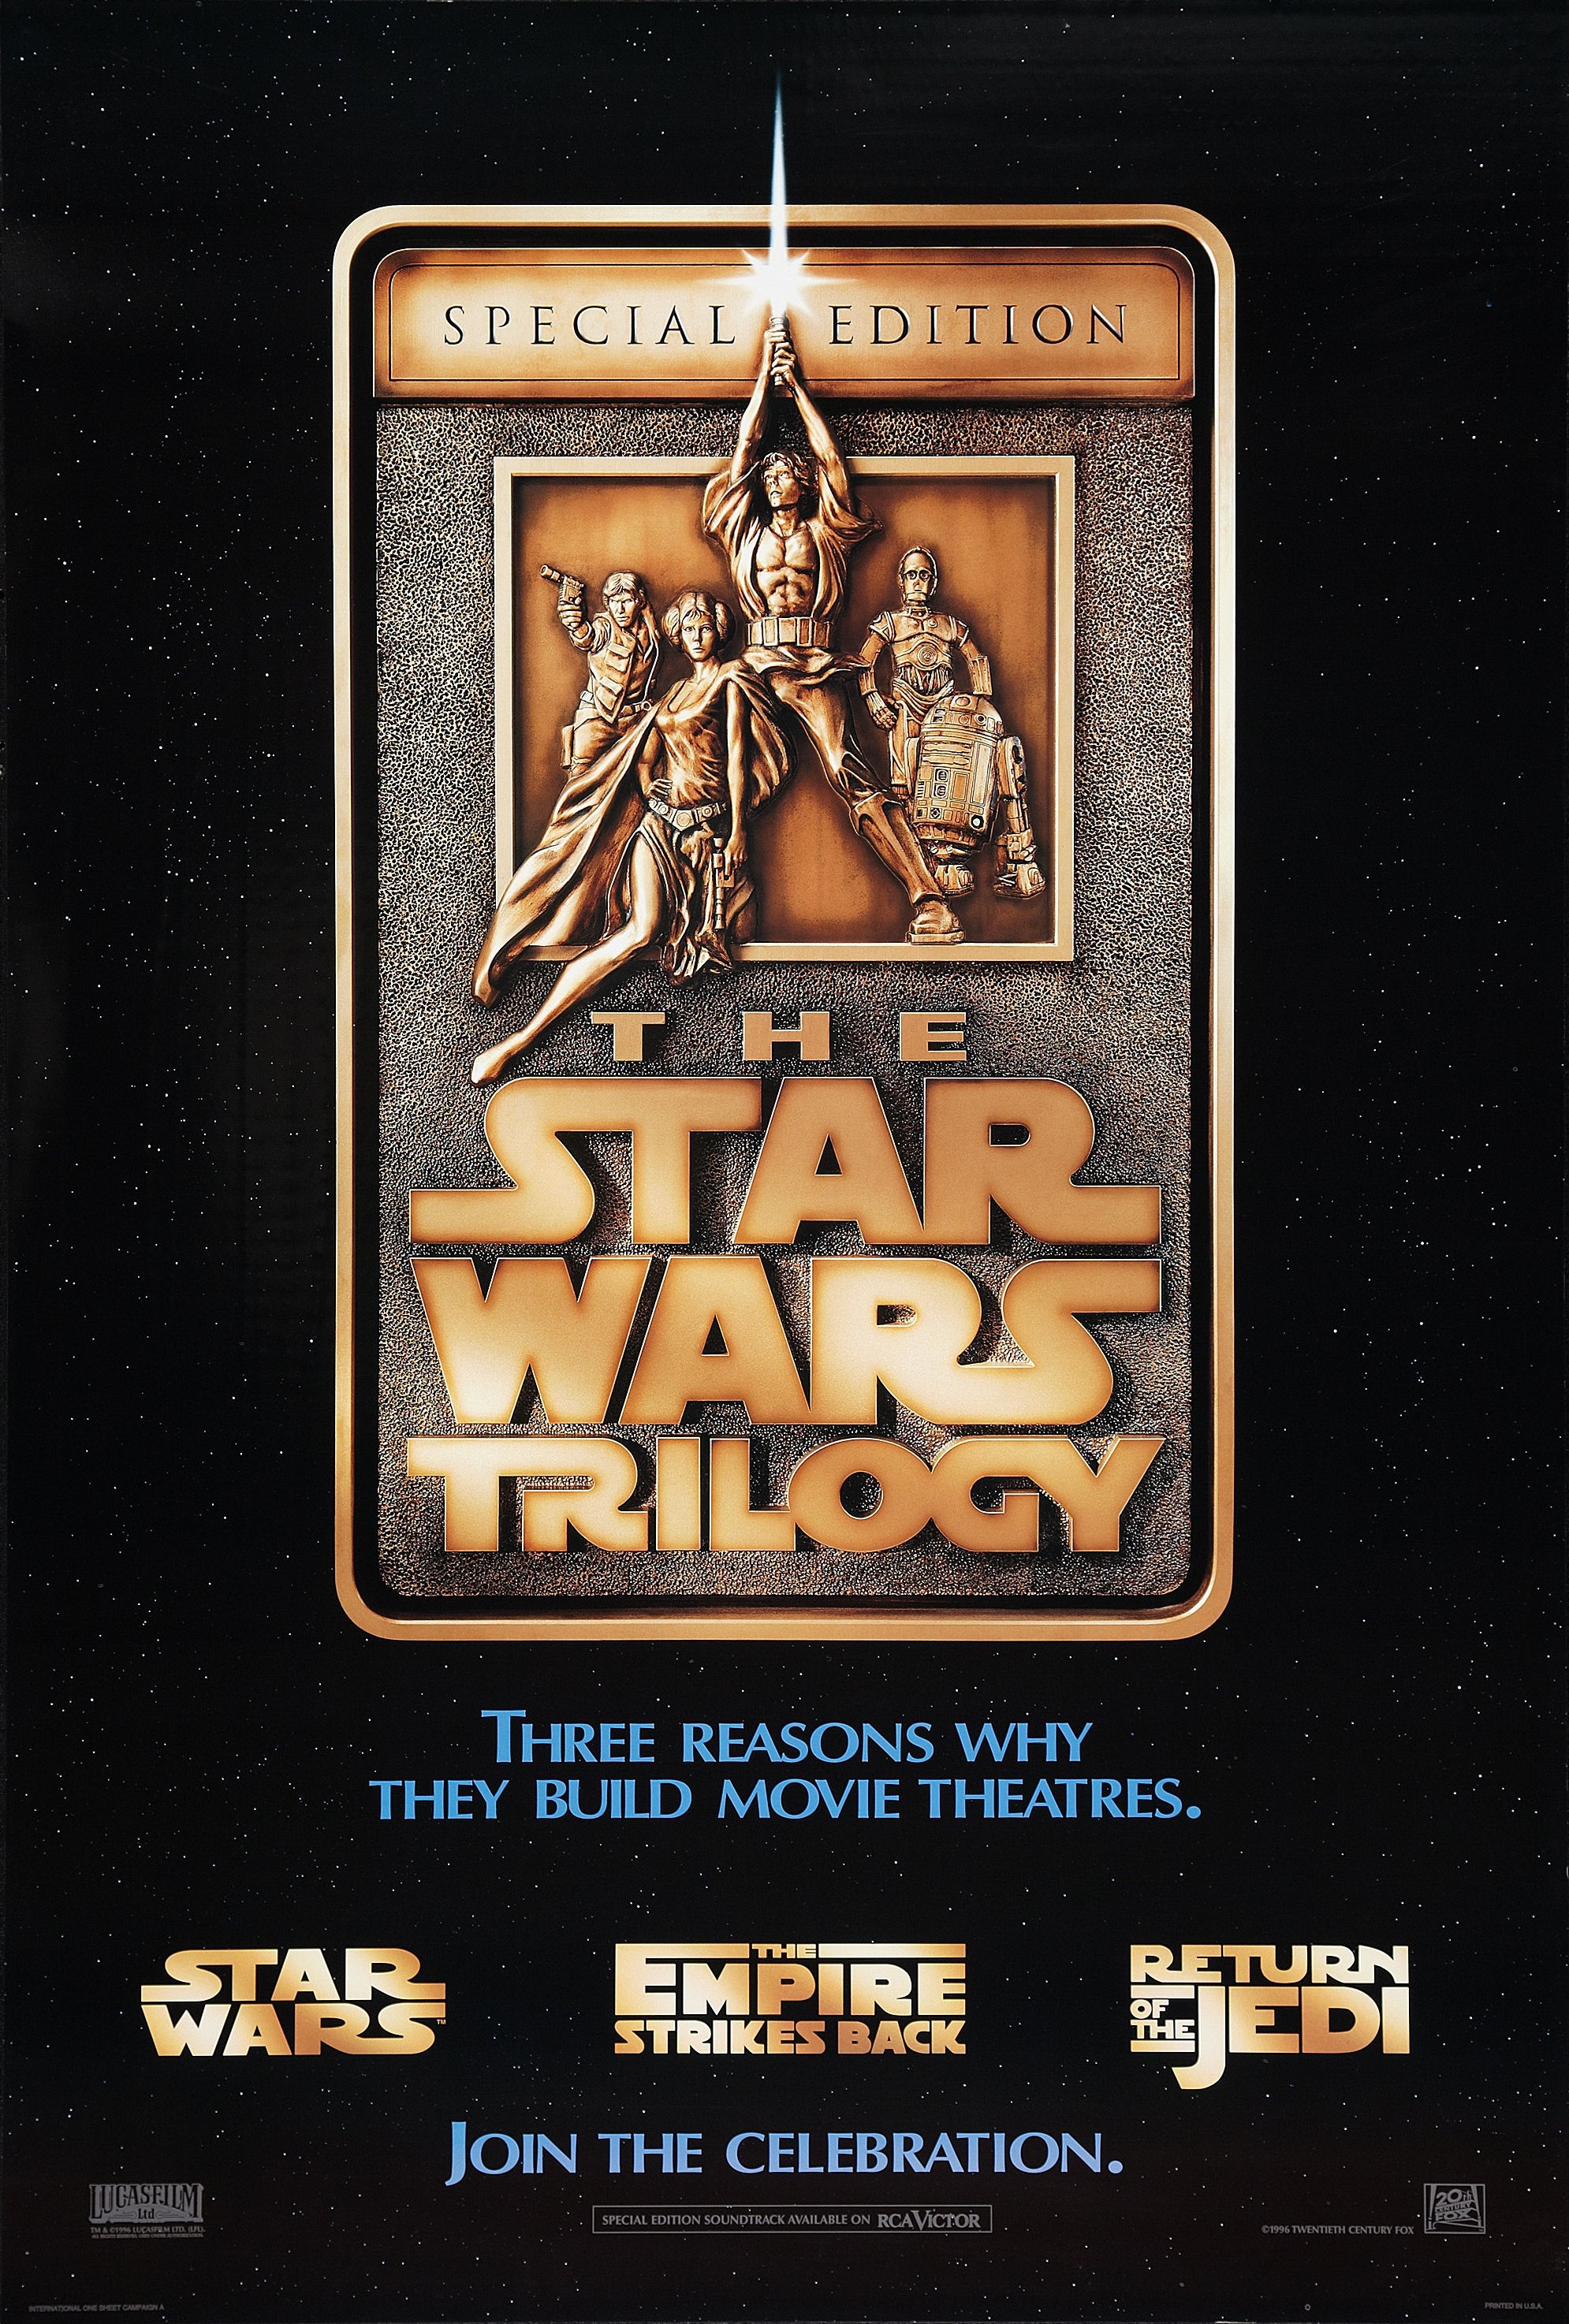 The Star Wars Trilogy Special Edition Wookieepedia, the Star Wars Wiki